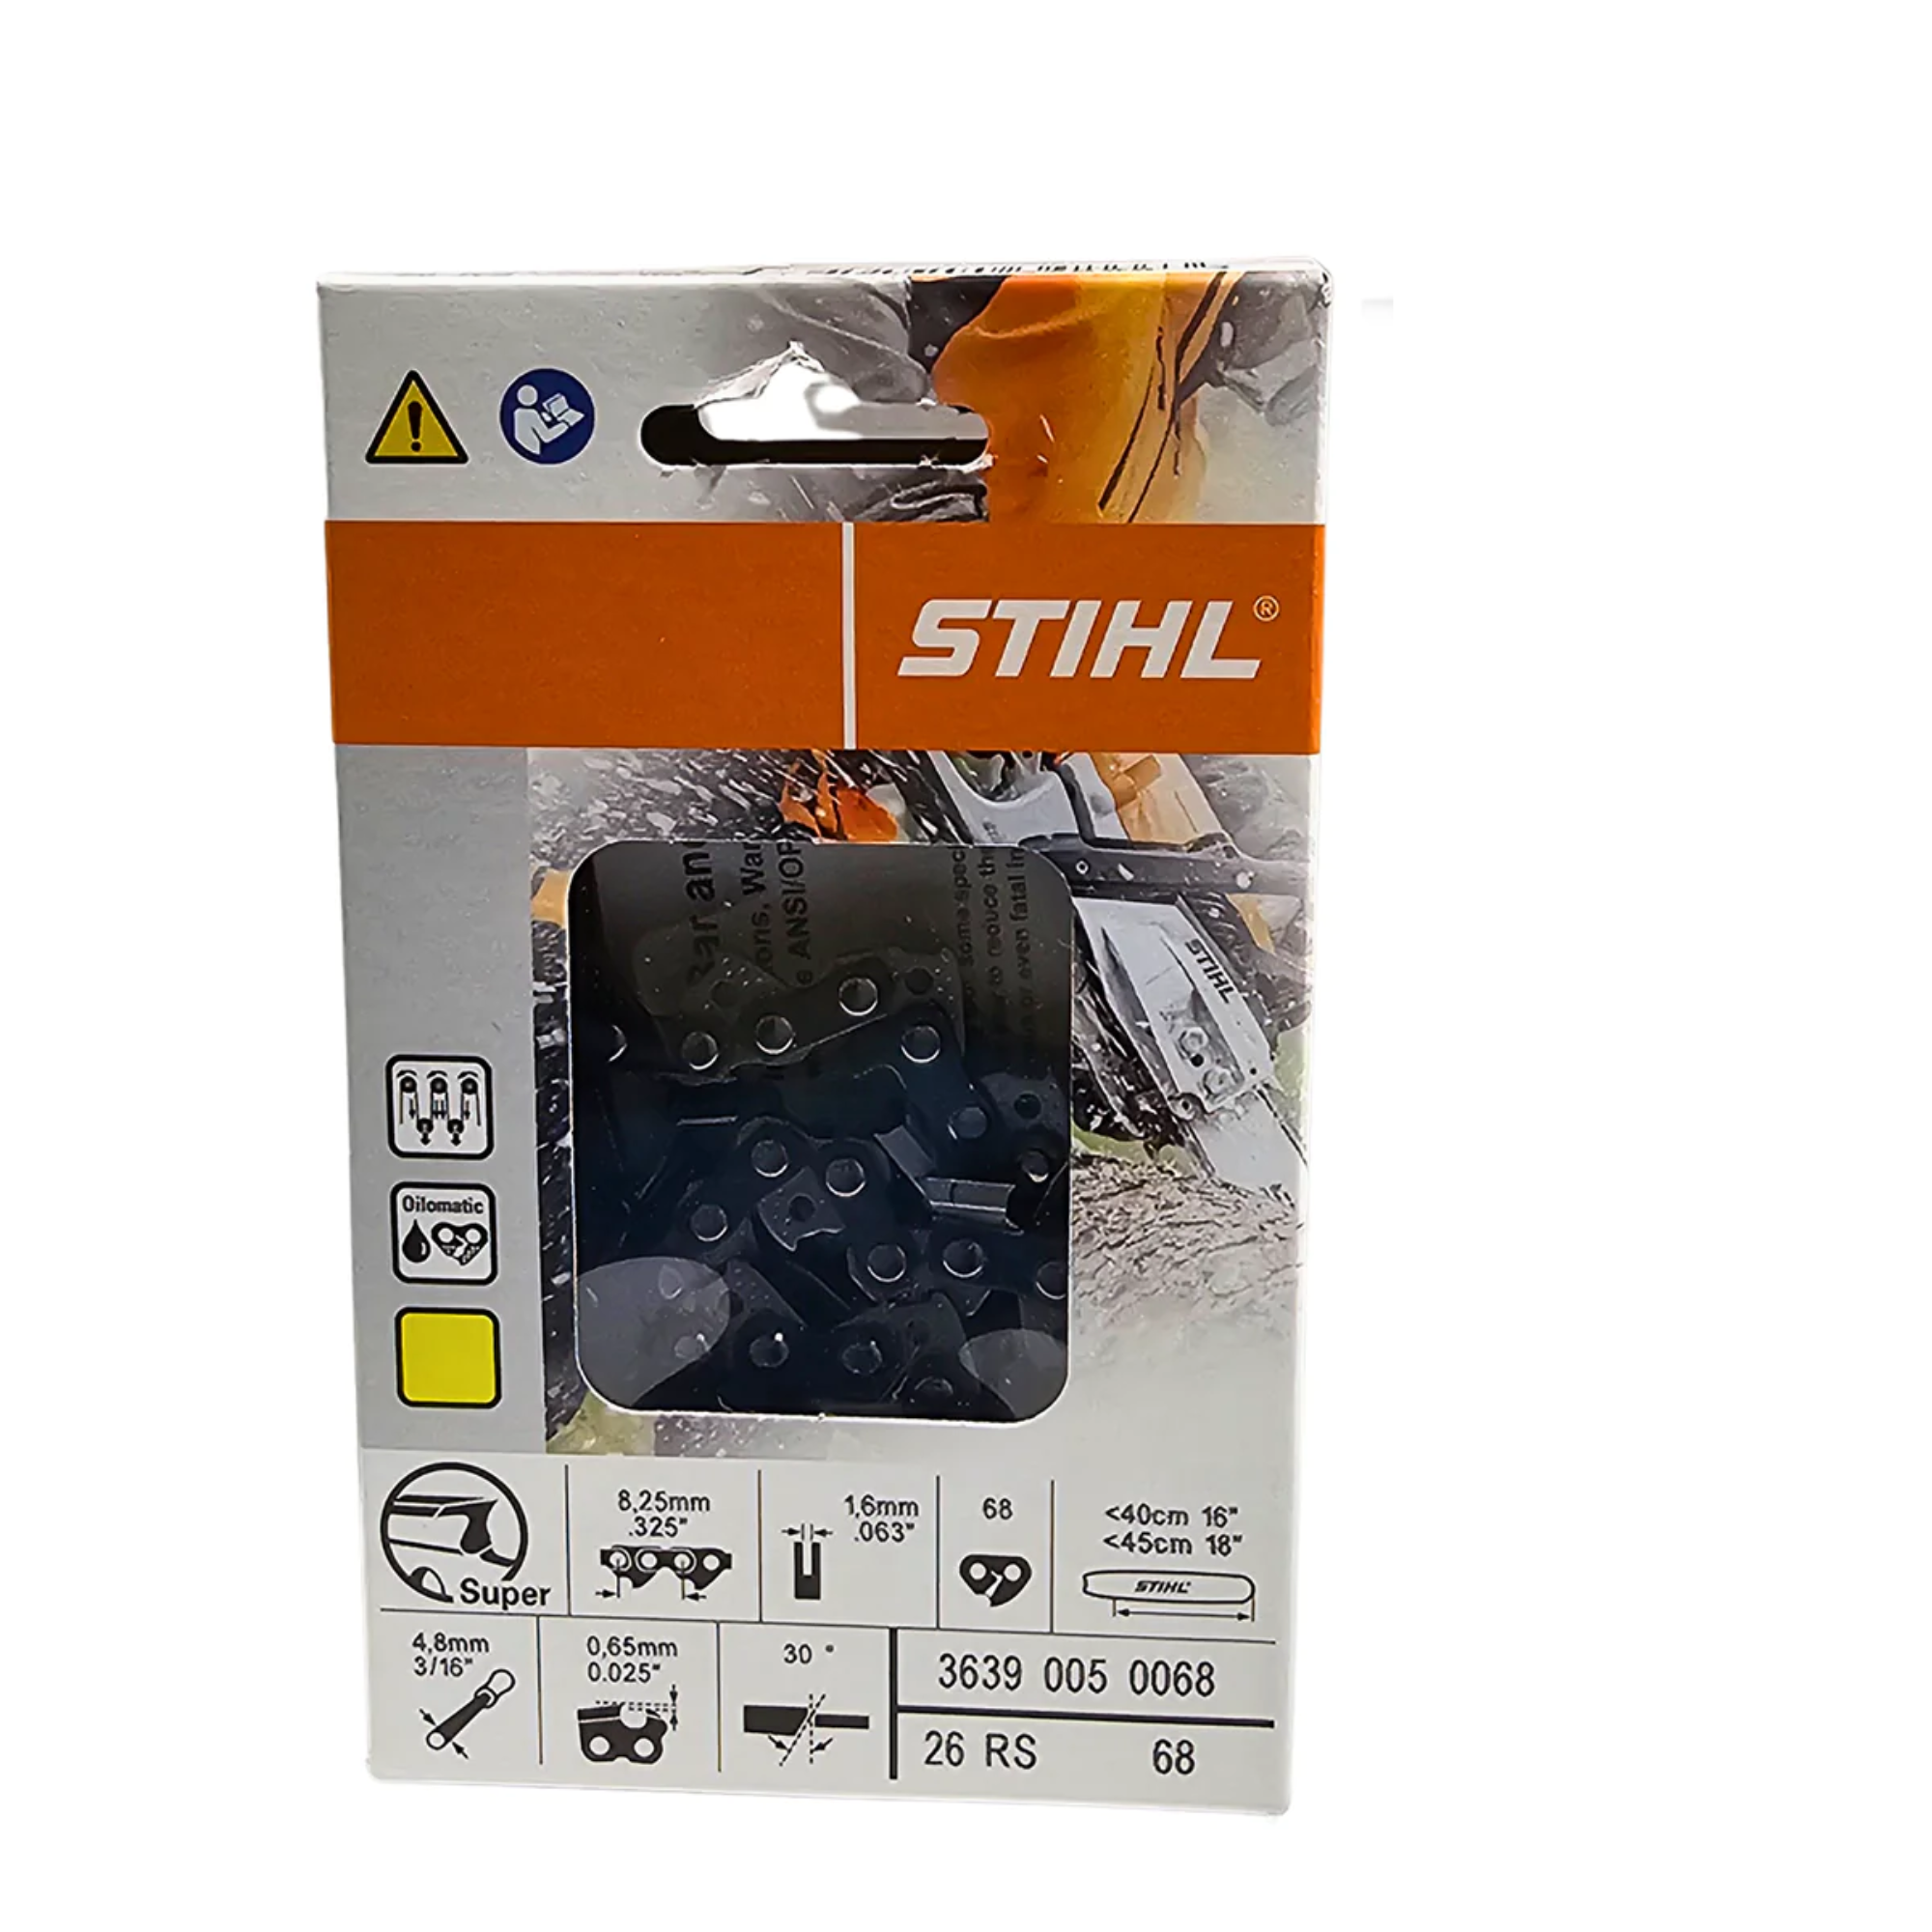 <FONT COLOR=RED >BULK </FONT COLOR=RED >| STIHL Oilomatic Rapid Super | 26 RS 68 | 18 in. | 68 Drive Links | Chainsaw Chain | 3639 005 0068